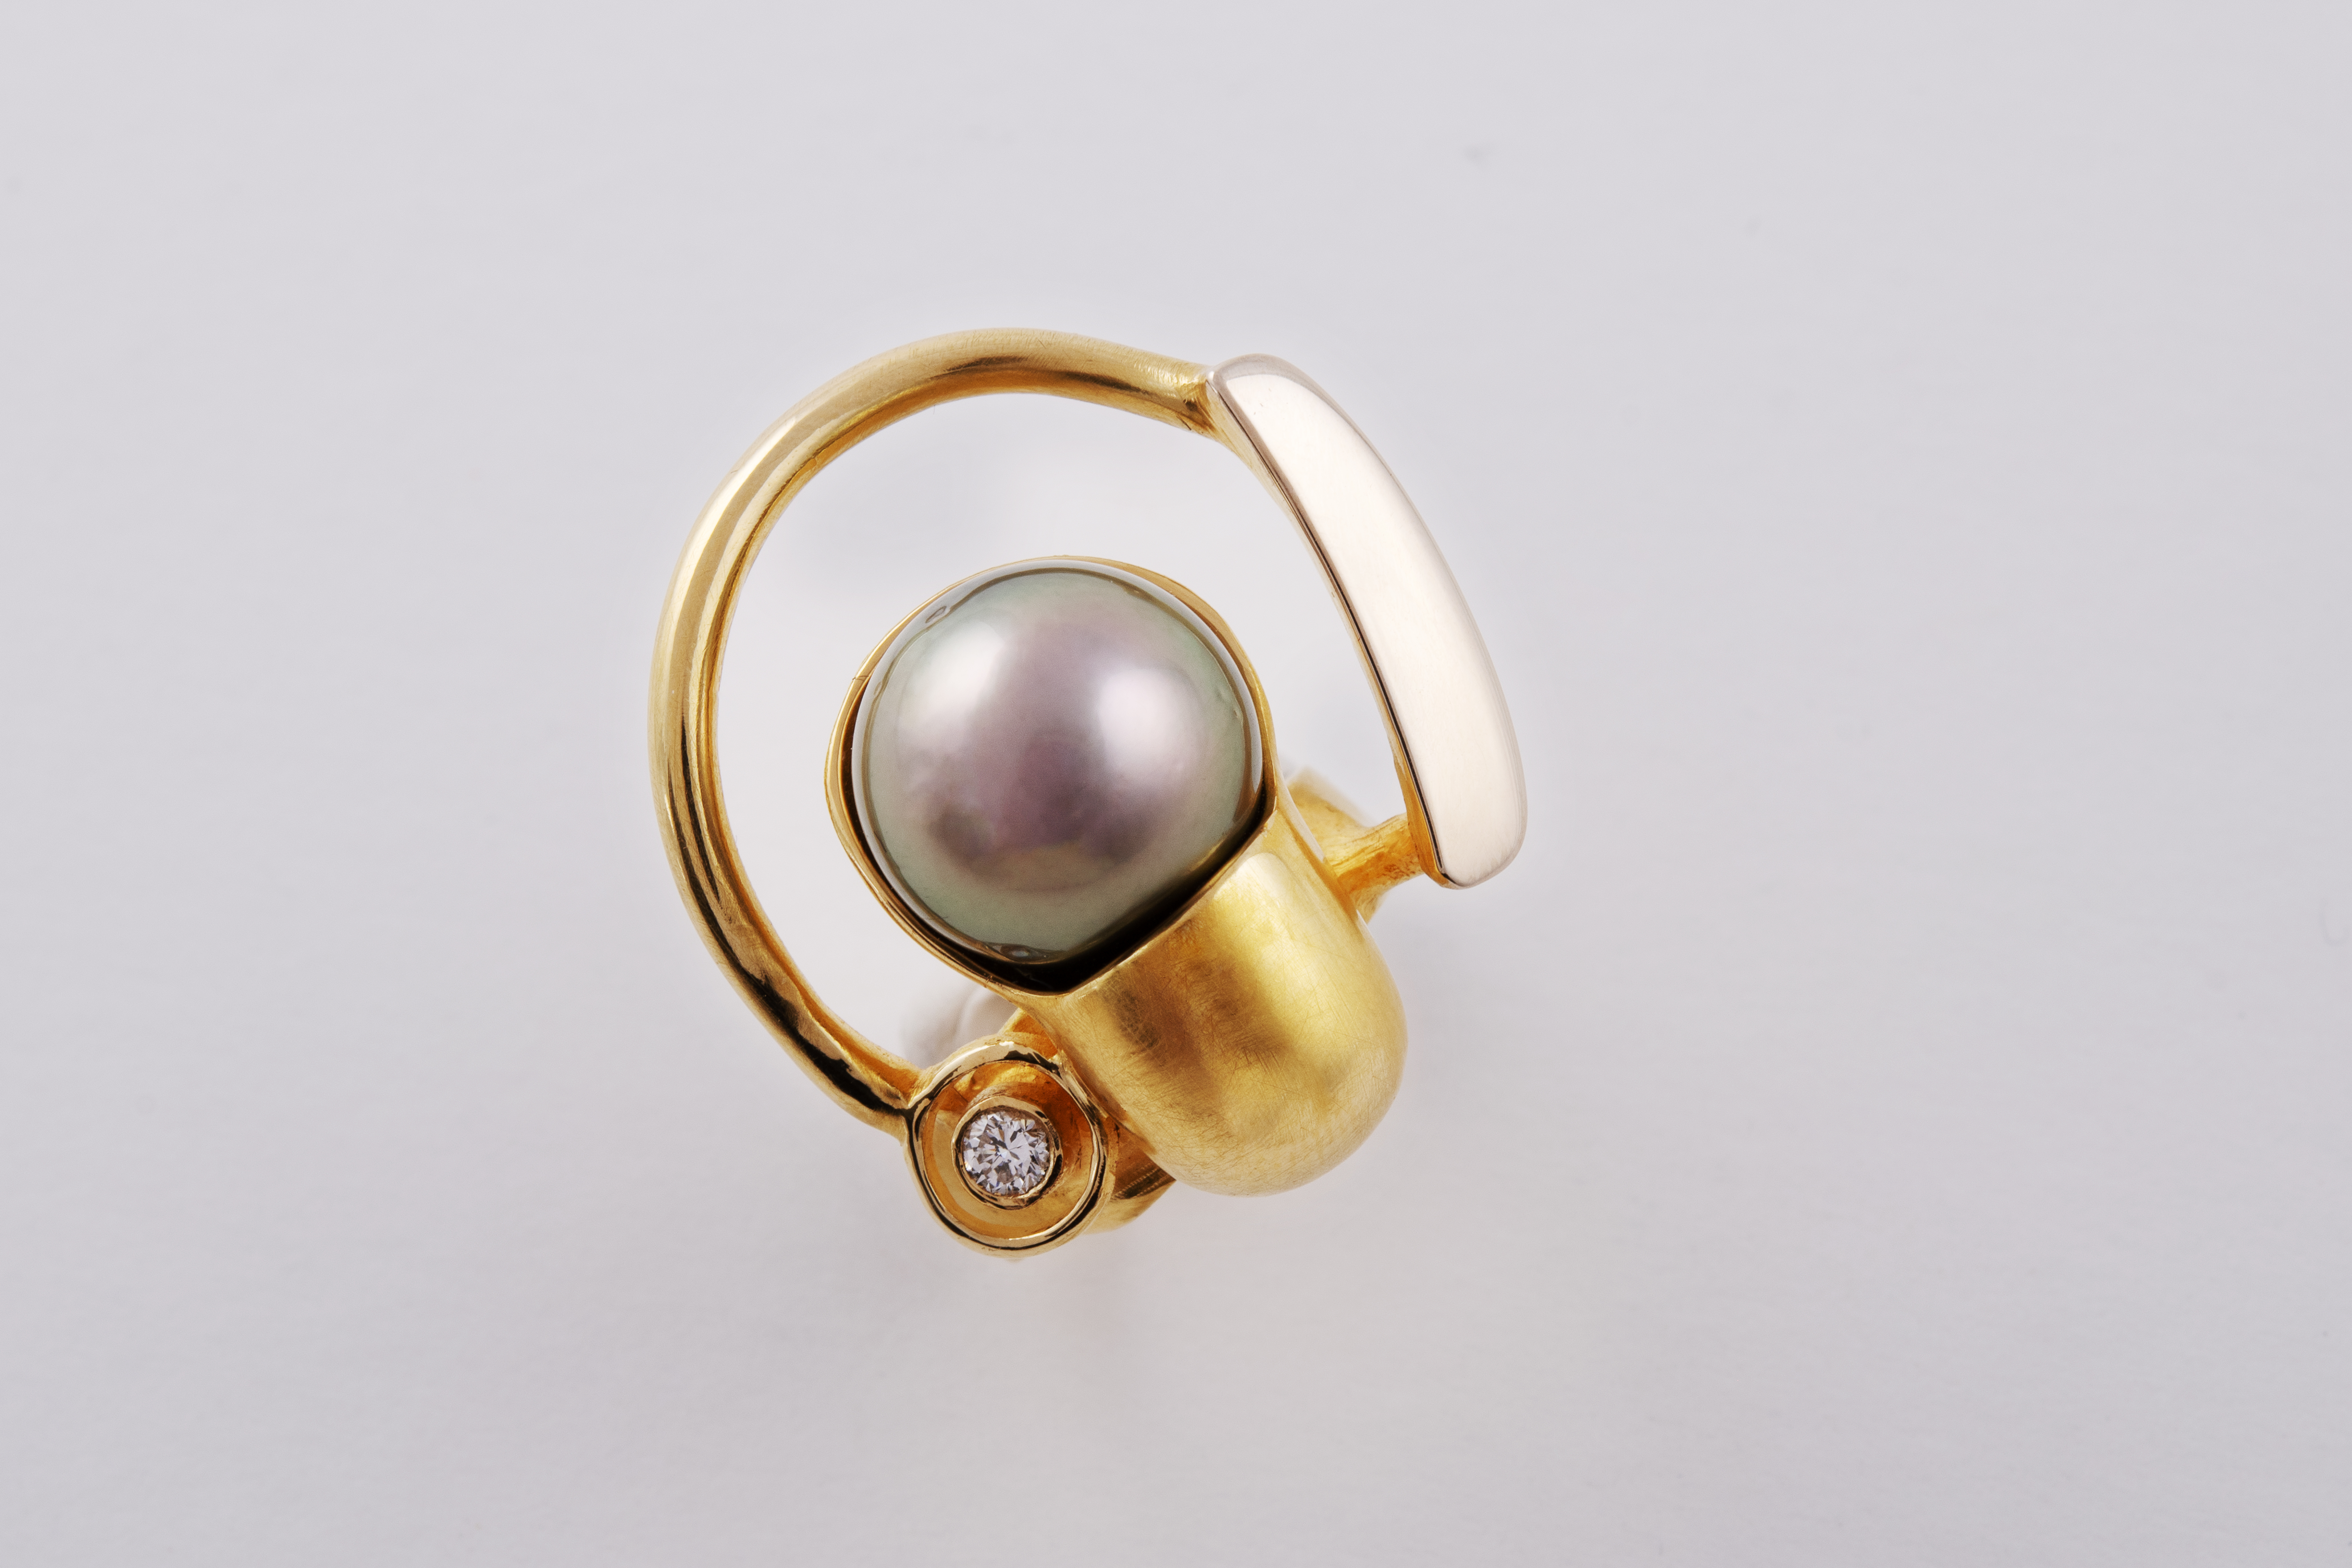 Claude_WESEL_Huitre_Oyster_ring_18ct_yellow_and_white_gold_Tahiti_pearl_Diamond_ring